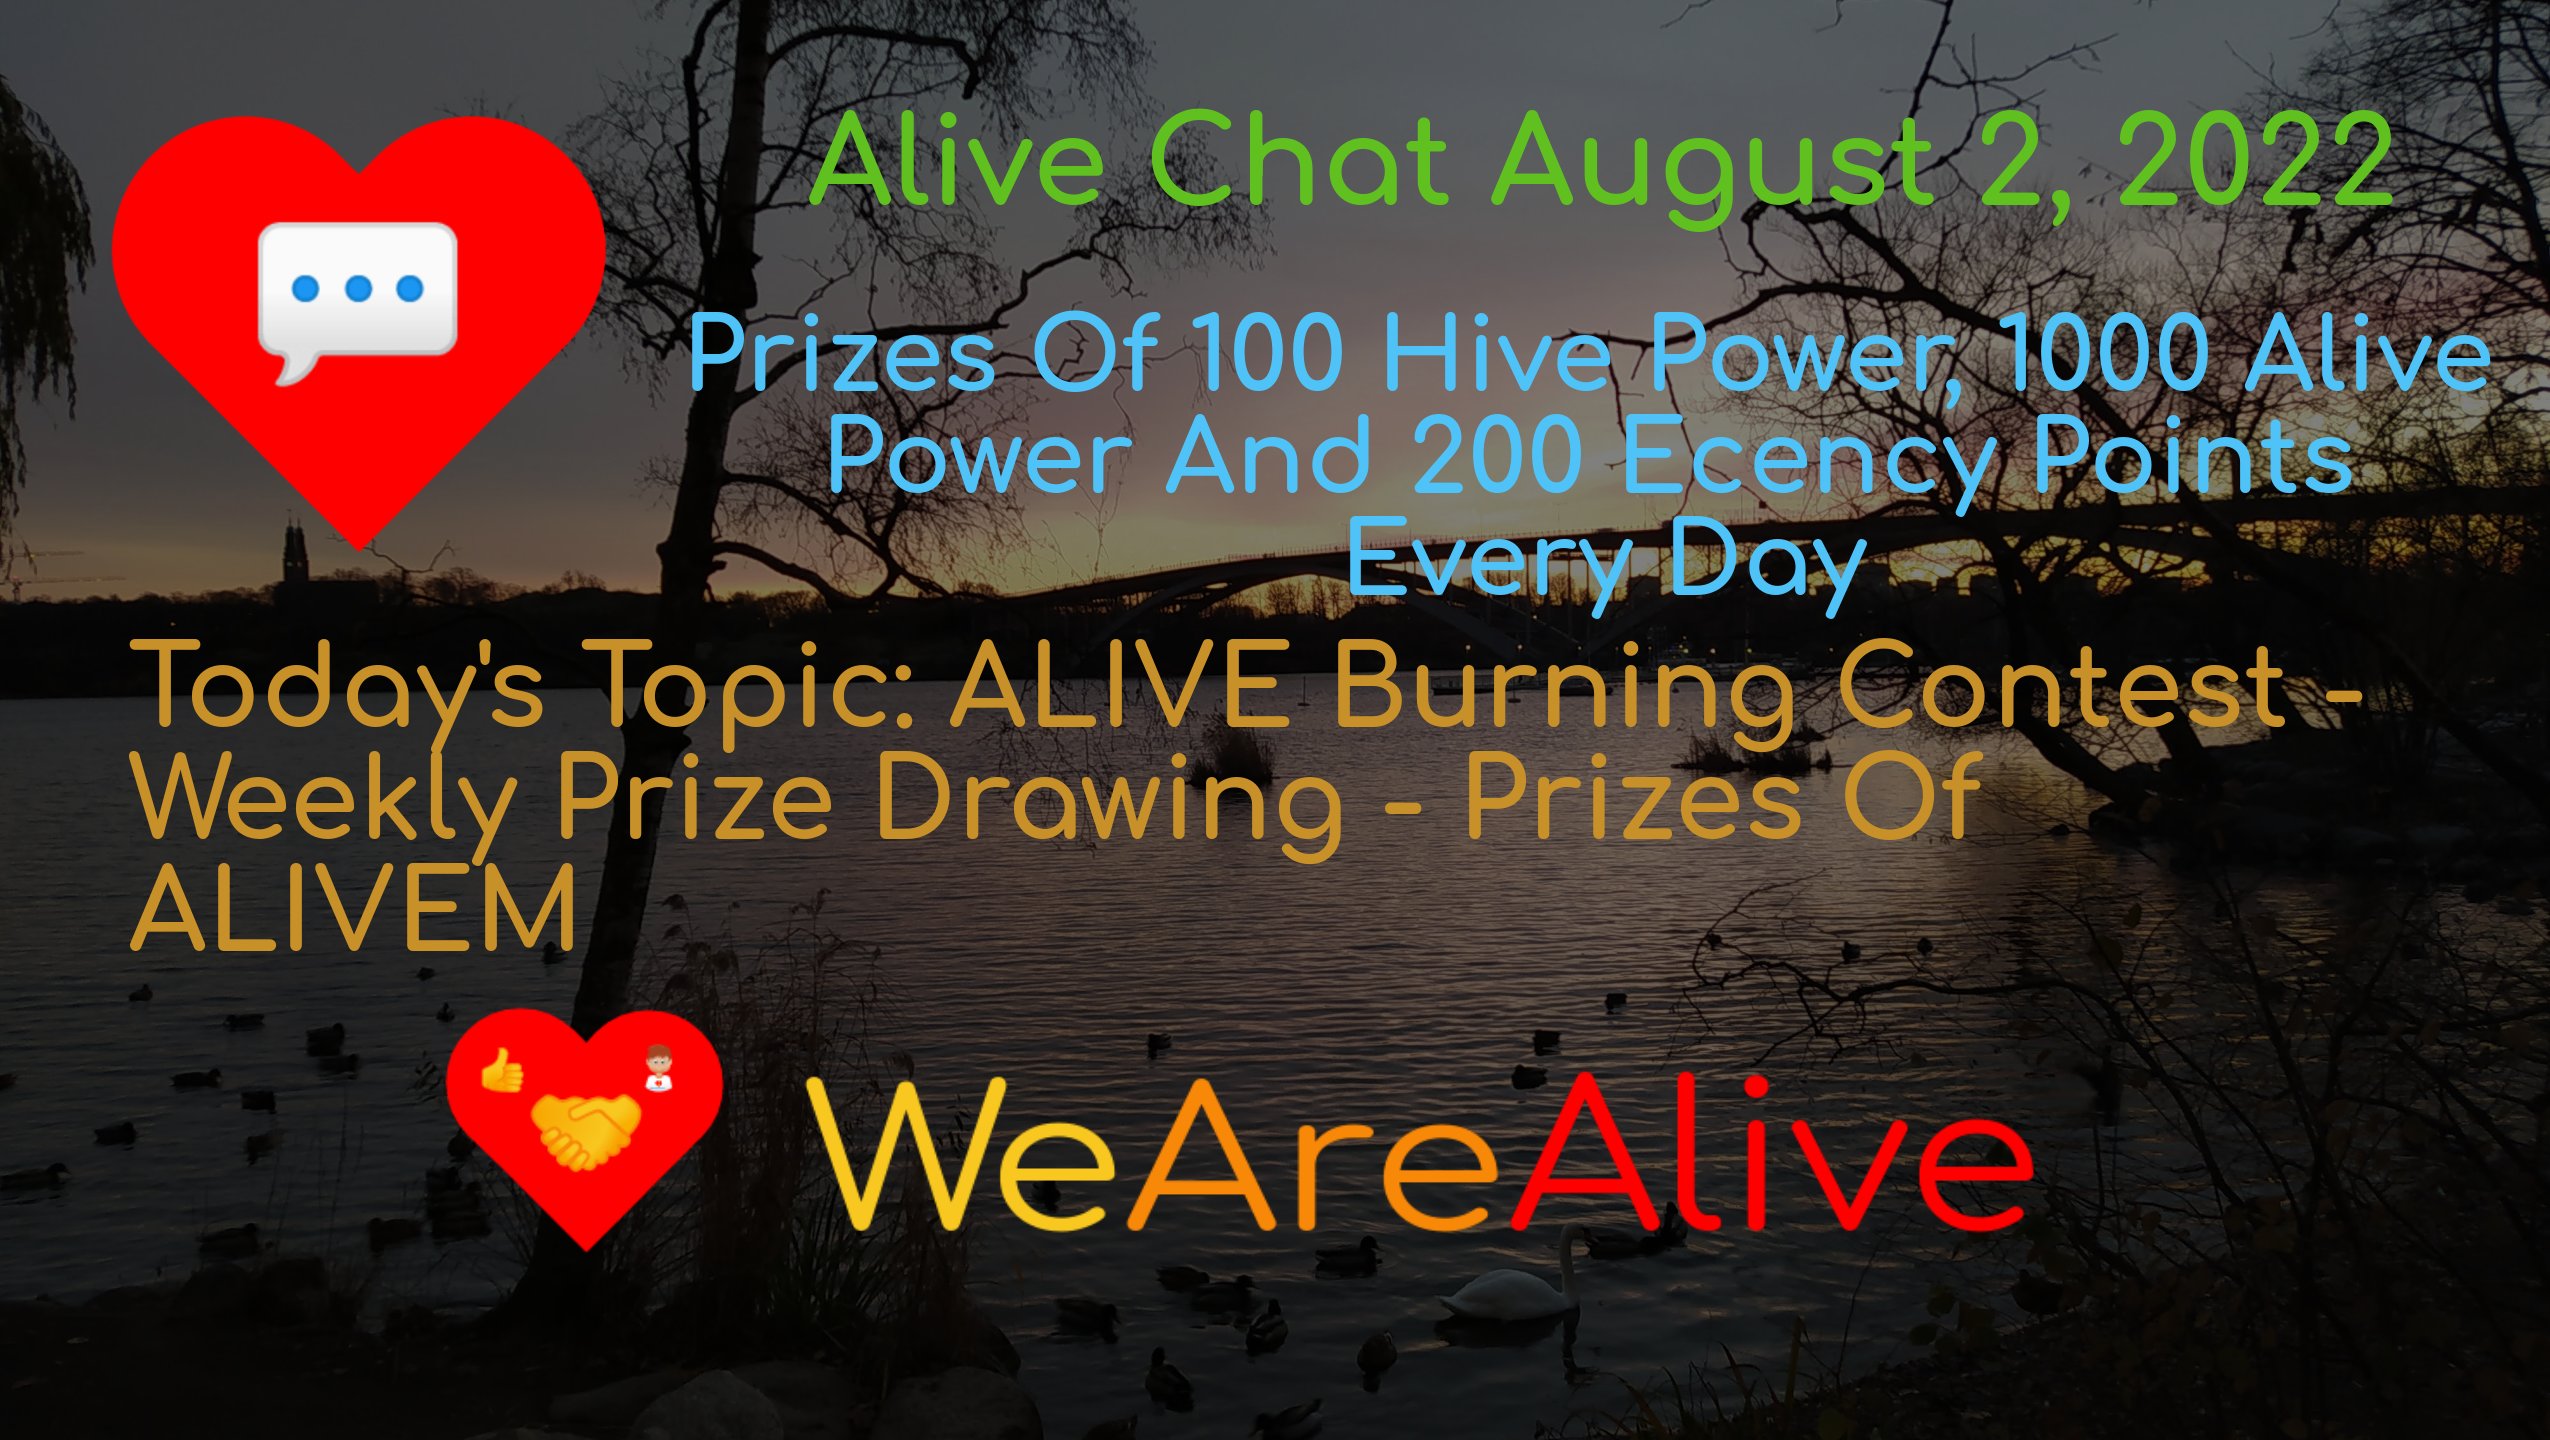 @alive.chat/alive-chat-august-2-2022-daily-prize-drawing-open-for-entries-todays-topic-alive-burning-contest-weekly-prize-drawing-prizes-o